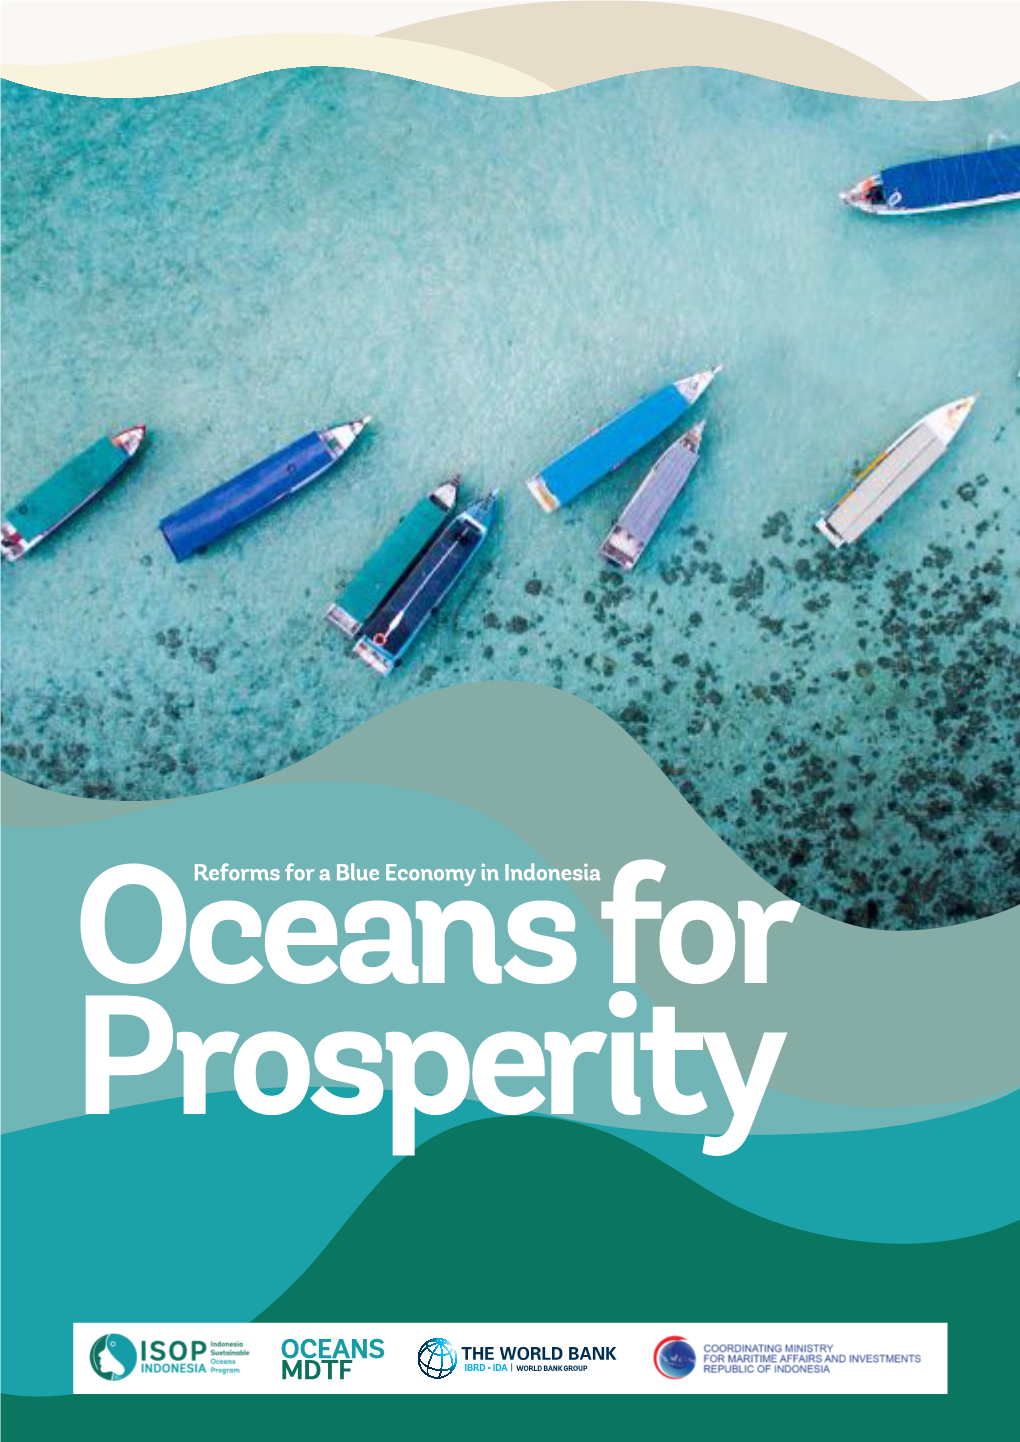 Oceans for Prosperity: Reforms for a Blue Economy in Indonesia